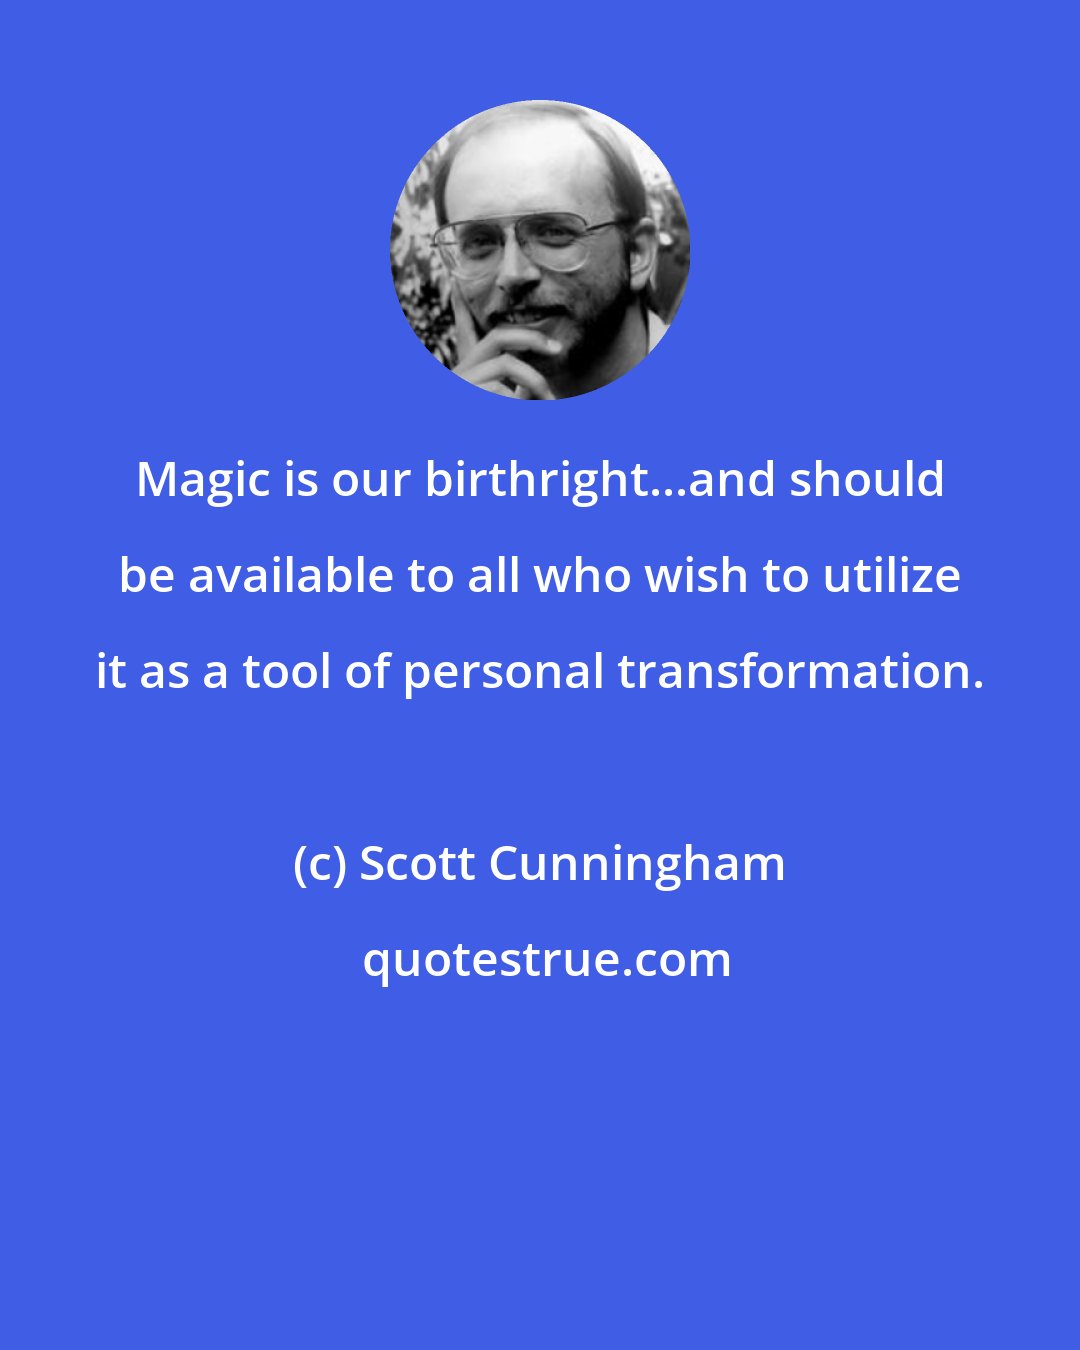 Scott Cunningham: Magic is our birthright...and should be available to all who wish to utilize it as a tool of personal transformation.